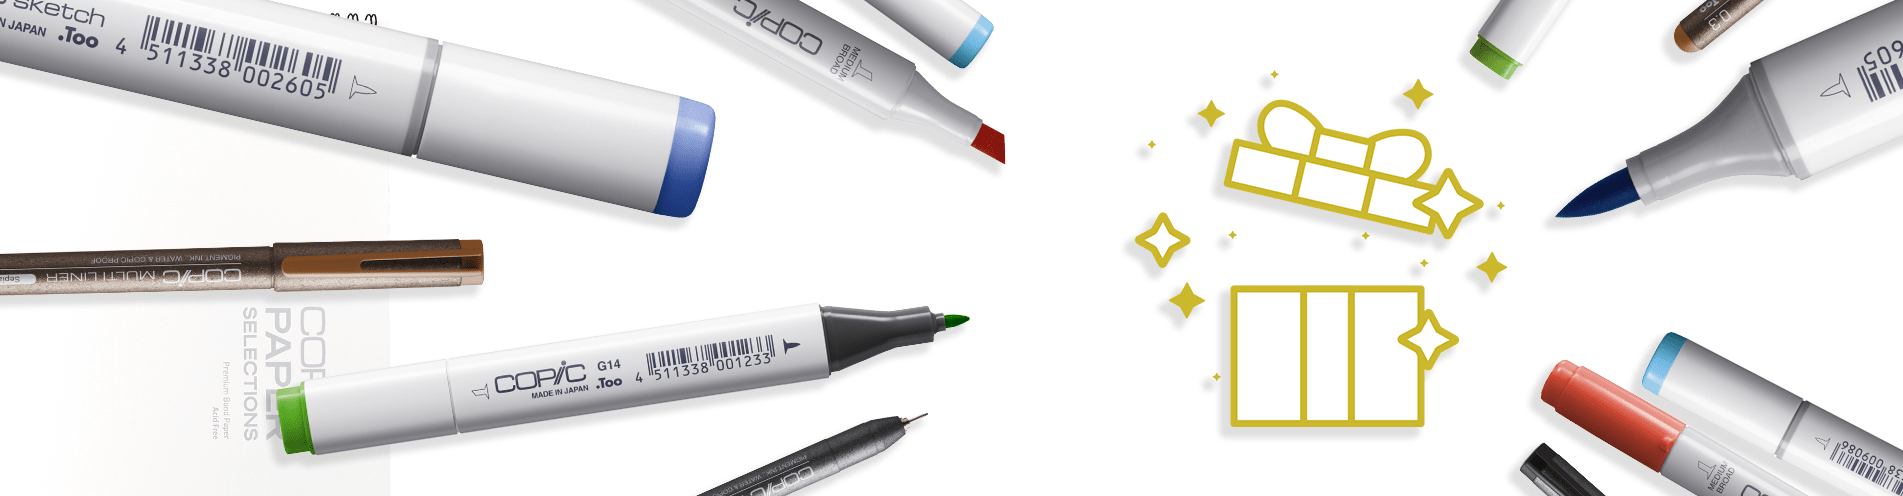 Are Copic Markers Worse Than Cheaper Brand Markers? — The Art Gear Guide